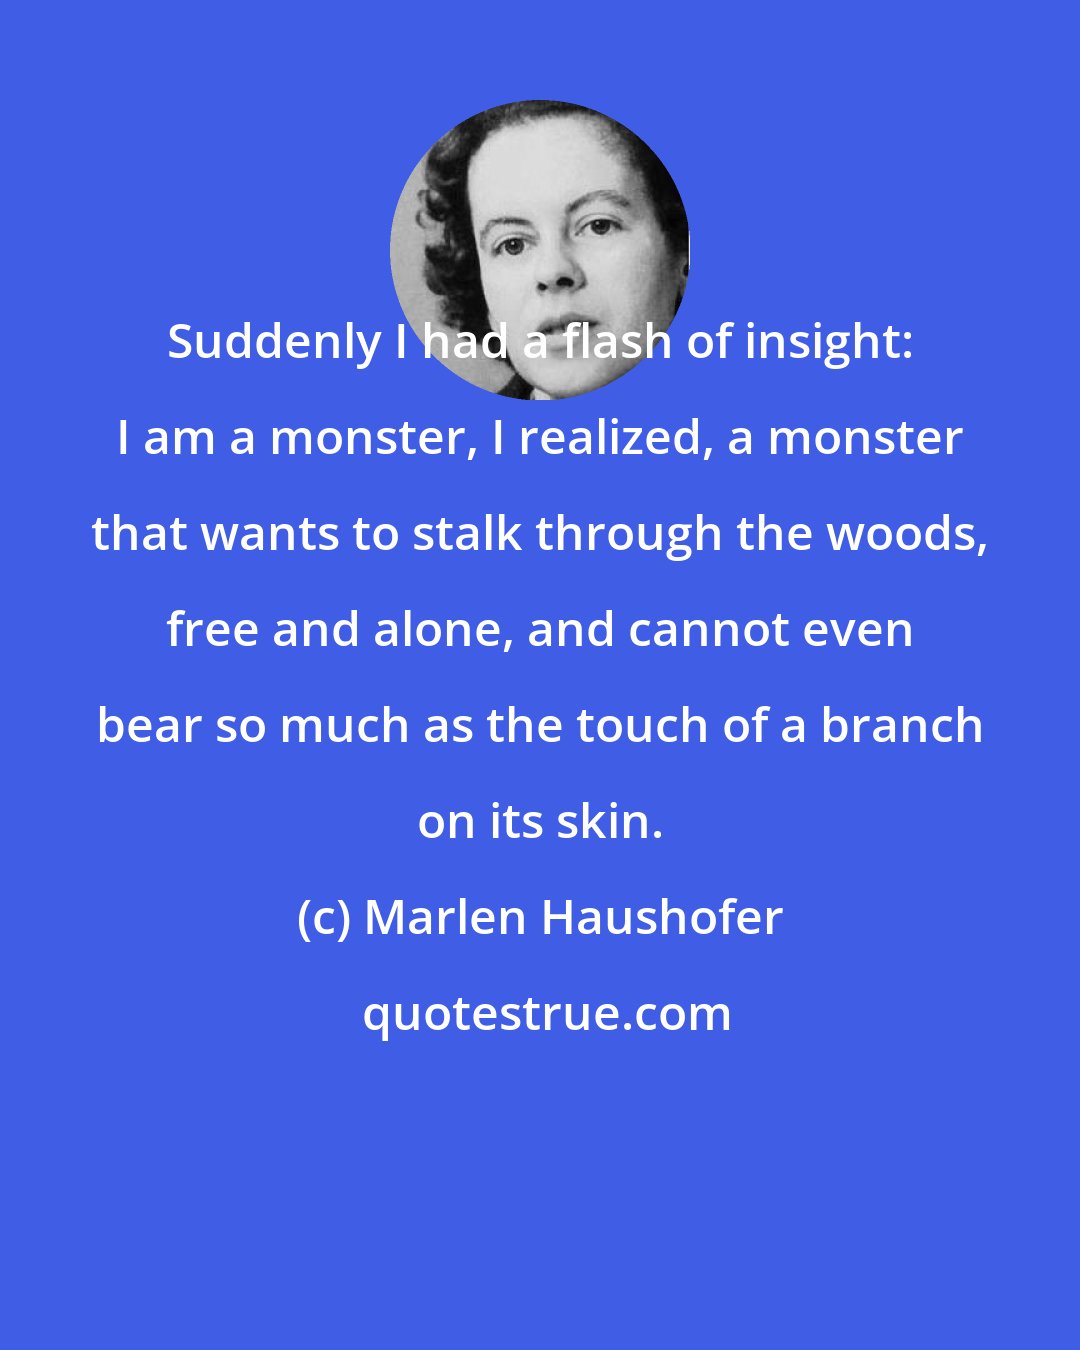 Marlen Haushofer: Suddenly I had a flash of insight: I am a monster, I realized, a monster that wants to stalk through the woods, free and alone, and cannot even bear so much as the touch of a branch on its skin.